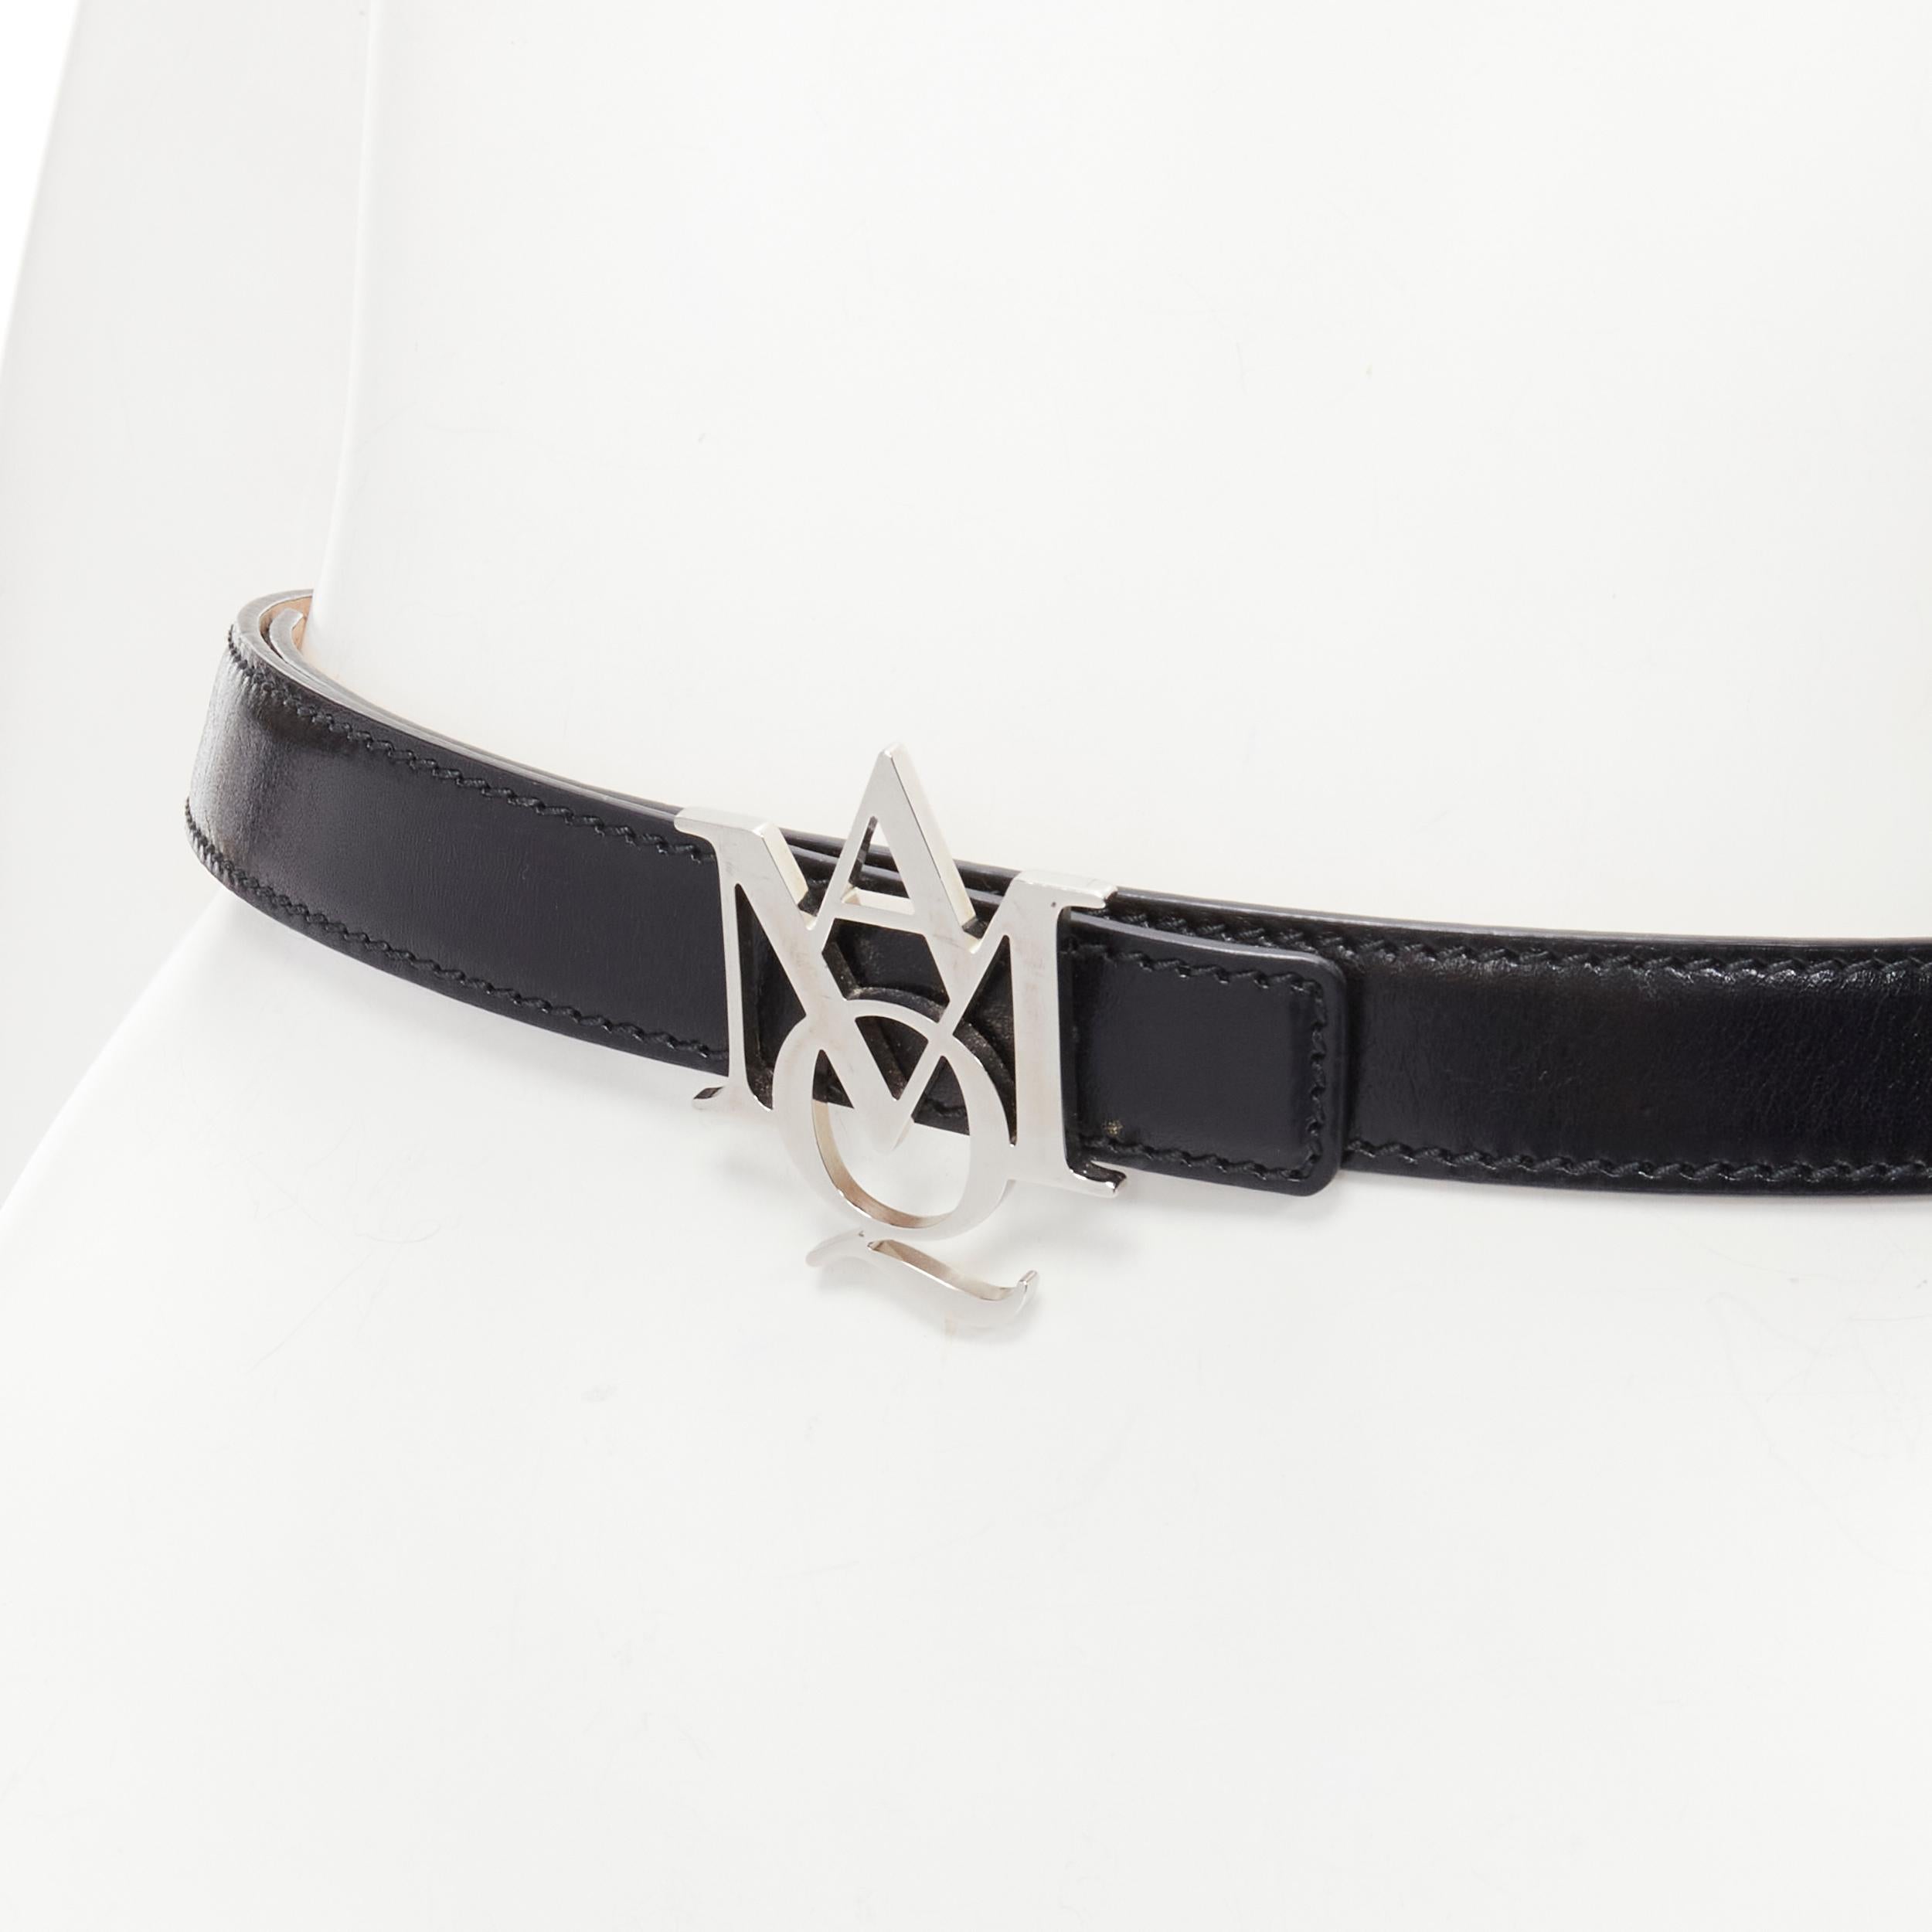 ALEXANDER MCQUEEN AMG silver buckle black skinny belt 75cm
Brand: Alexander McQueen
Material: Leather
Color: Black
Pattern: Solid
Closure: Pin
Made in: Italy

CONDITION:
Condition: Very good, this item was pre-owned and is in very good condition.